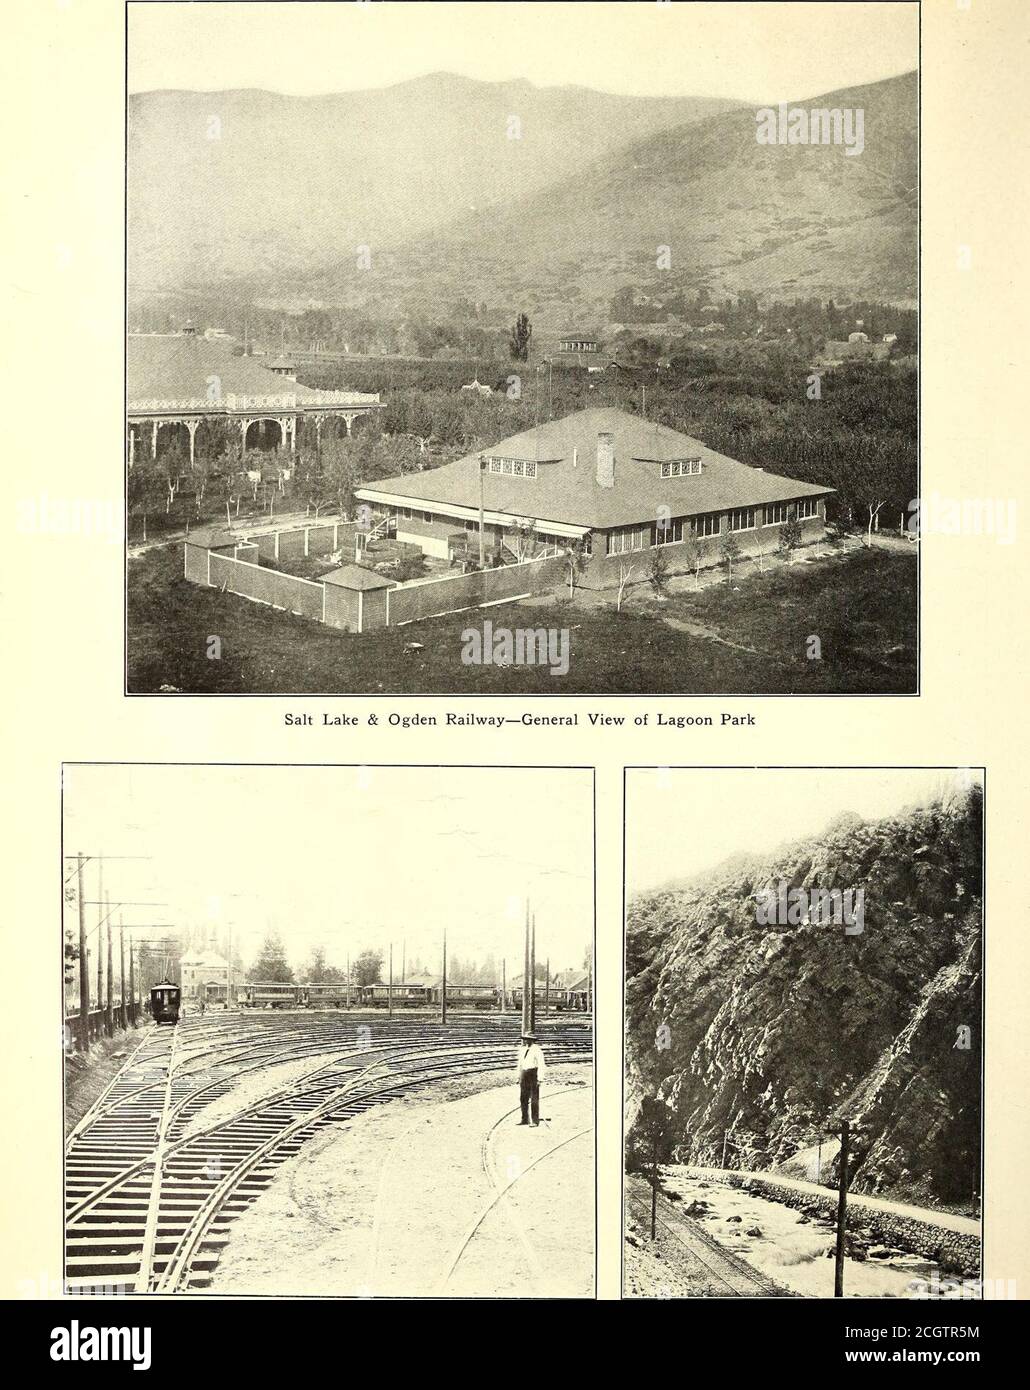 . Electric railway journal . Colorado Springs & Interurban—Exterior of Power Station Colorado Springs & Interurban—Interior of Power Station Plate XVI. Utah Light & Railway—Yards of New Car House New Electric Road in Ogden Canyon October 2, 1909 ] ELECTRIC RAILWAY JOURNAL. 515 The boiler-house is equipped with a continuous conveyorfor coal and ash handling. Whenever mine-run coal is ob-tained it is crushed to the size of slack so that uniform firingconditions are secured. The boiler equipment is made up offour 300-hp and two 400-hp B. & W. type boilers. Oneof the 400-hp boilers has an extensio Stock Photo